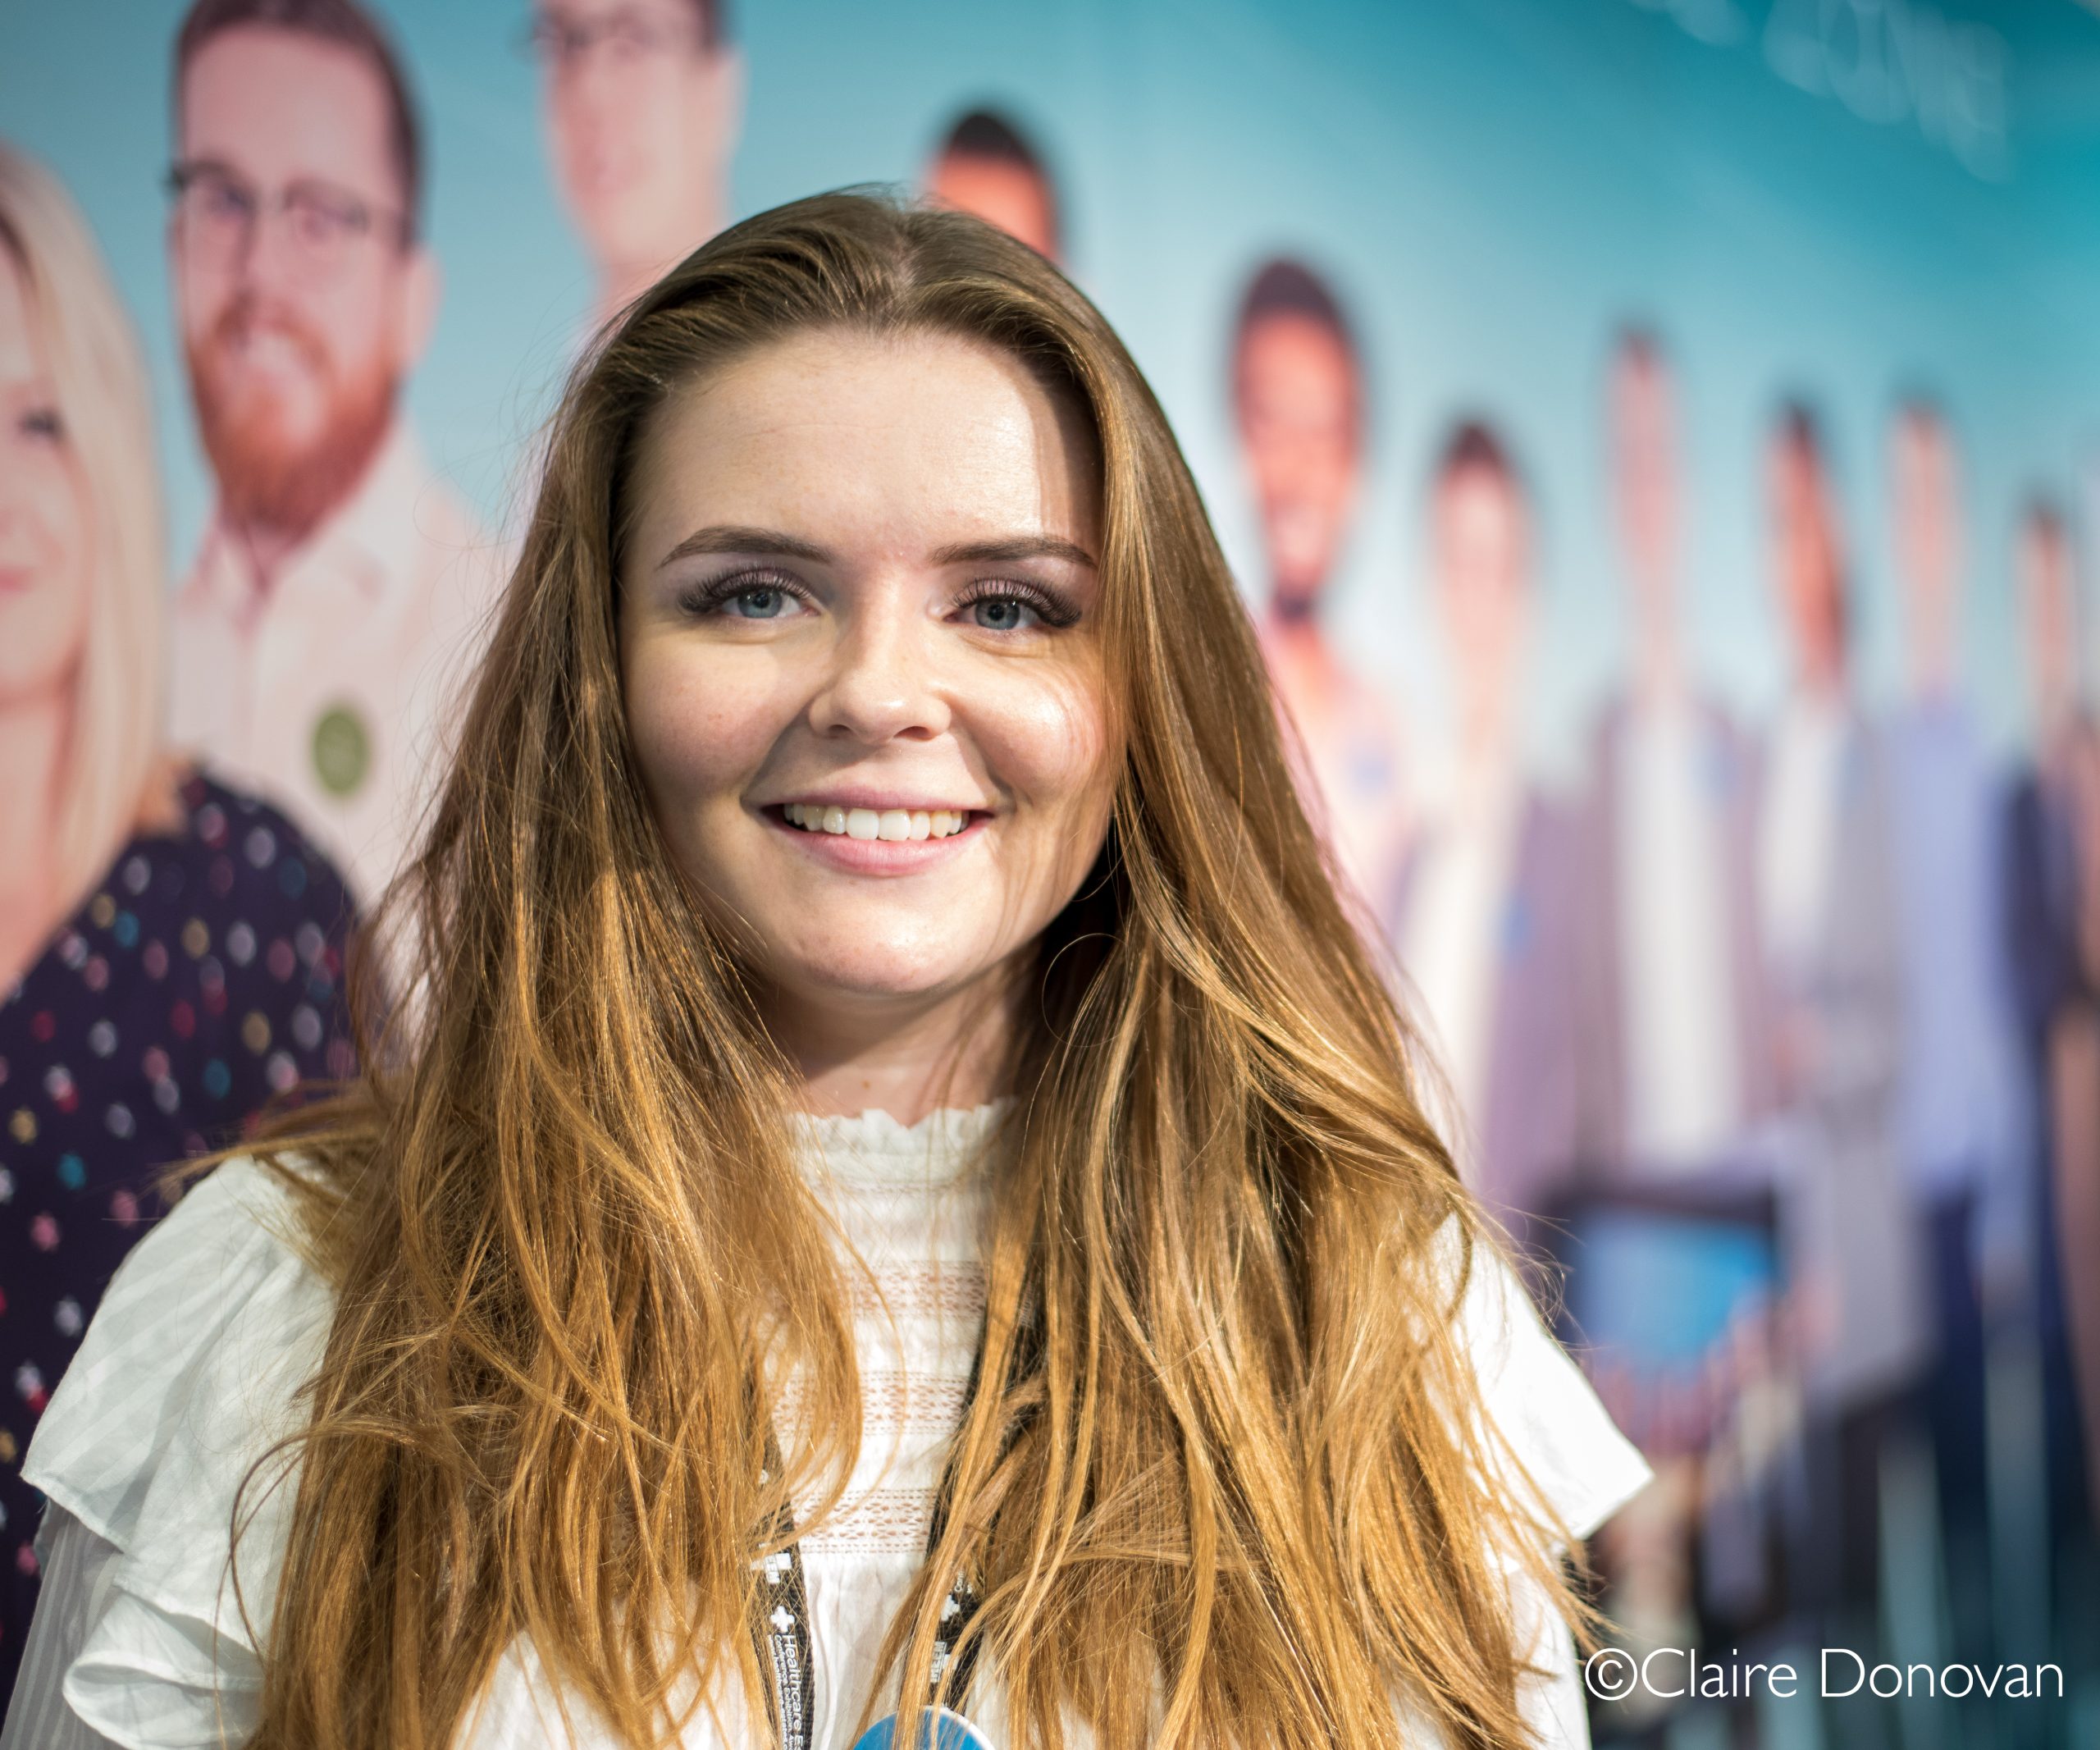 Megan Whitbread wins 'Apprentice of the Year' at the CIBSE Young Engineers Awards 2020